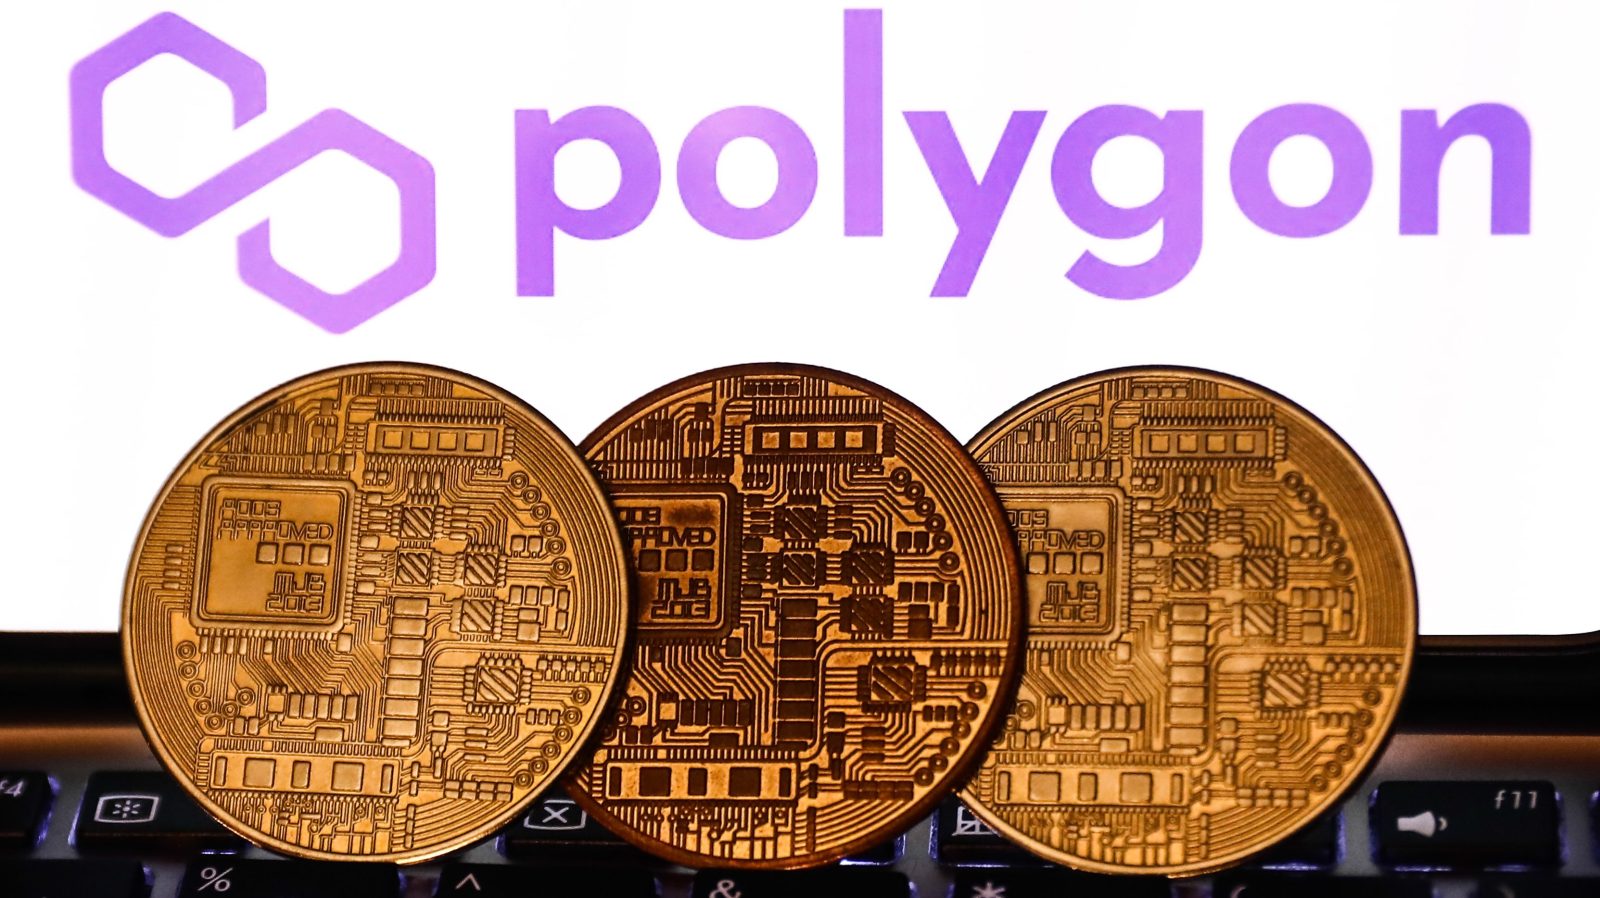 Polygon’s slew of corporate partnerships has led the chain to become the “Web3 on-ramp for millions of users